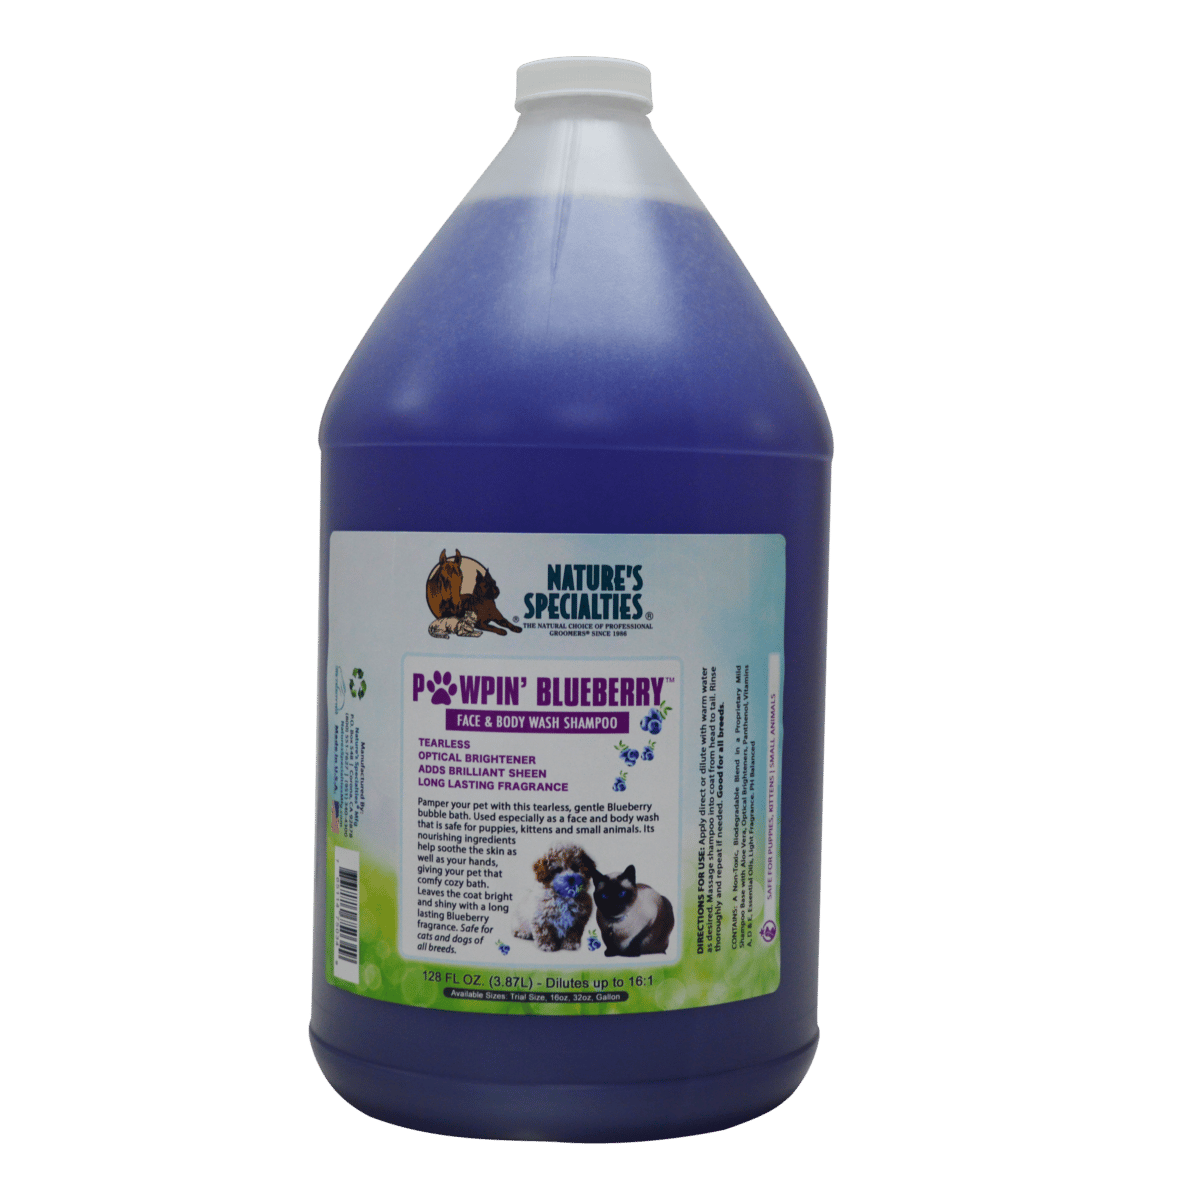 natures specialties pawpin blueberry gallon shampoo